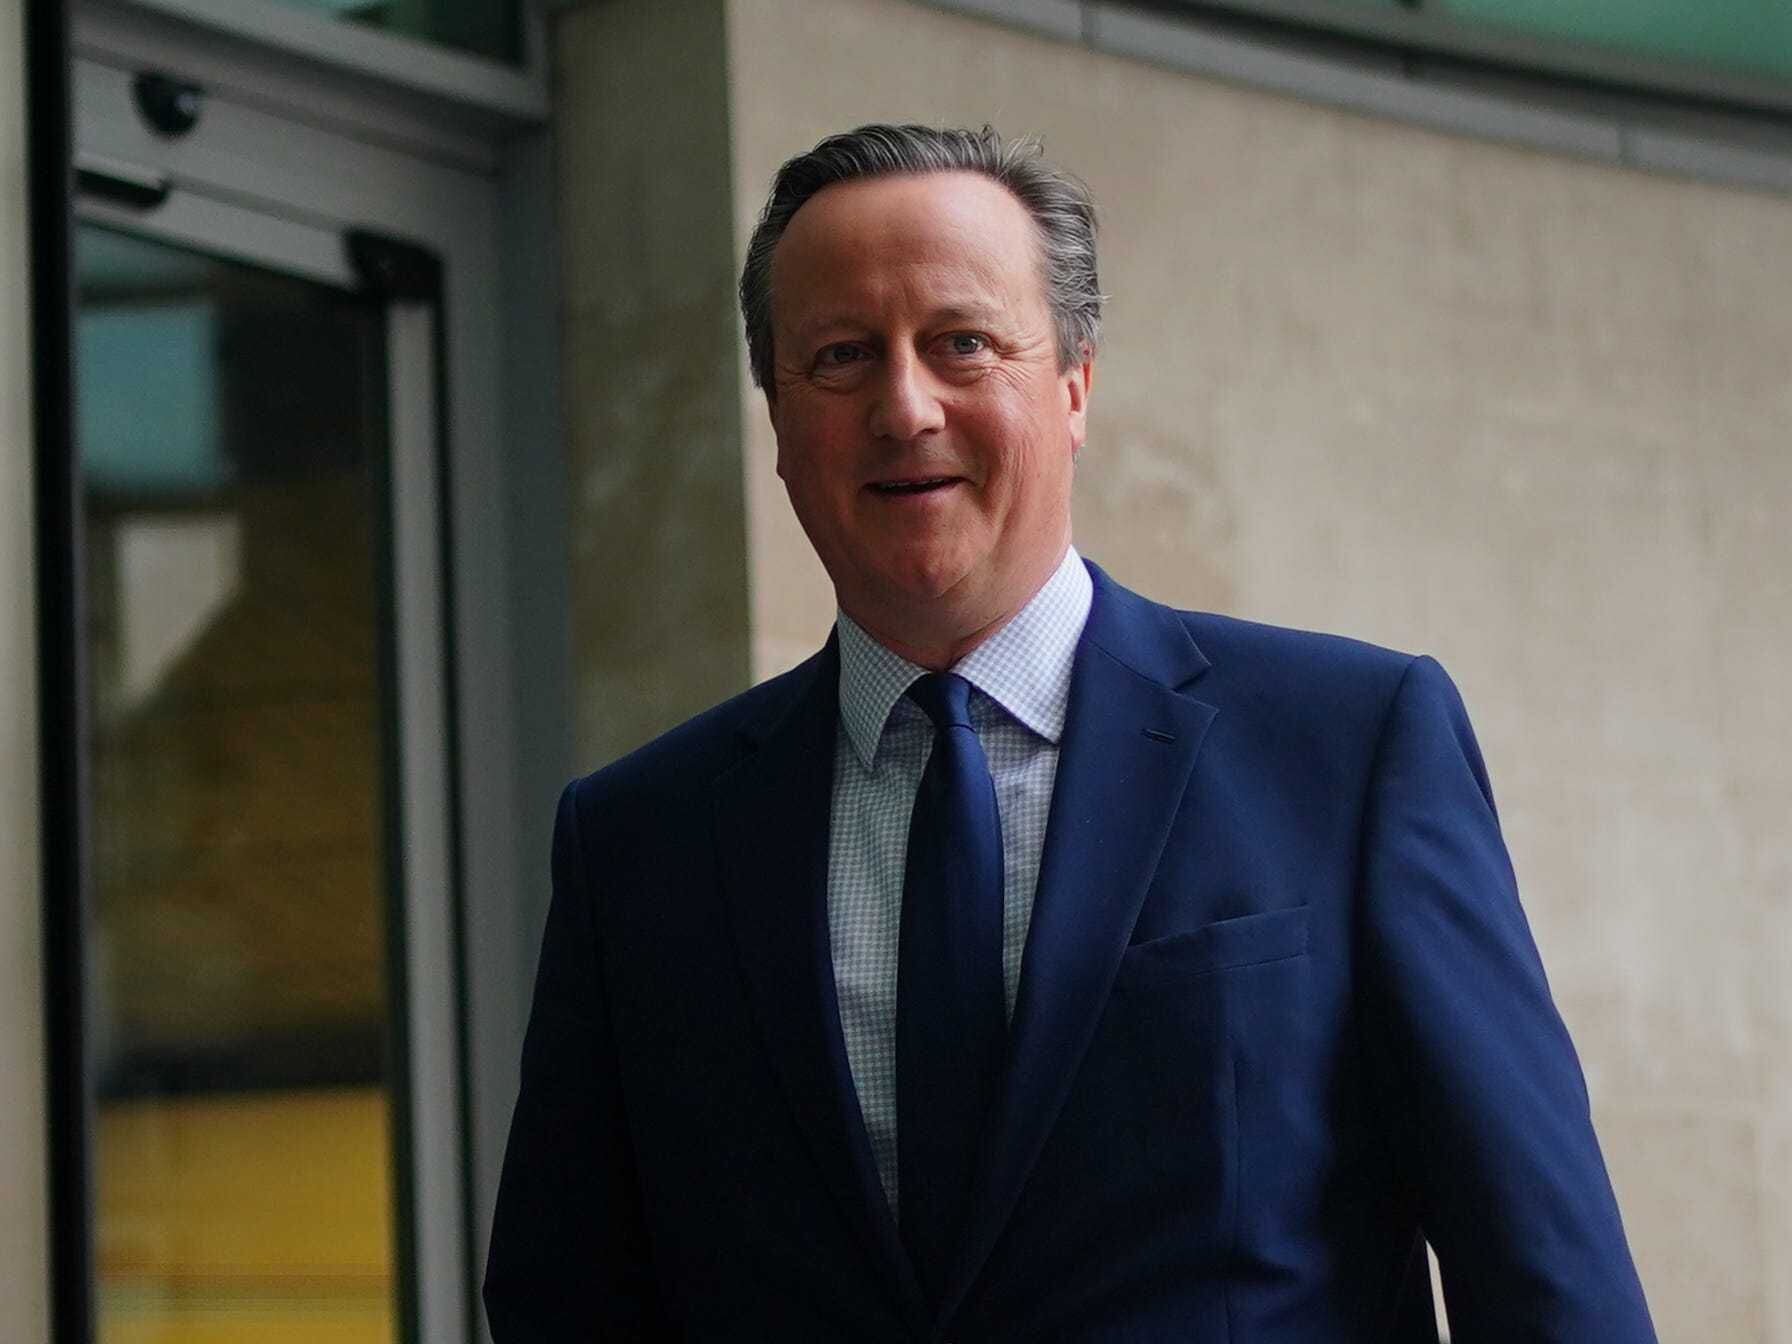 Halting arms exports to Israel ‘not a wise path’, insists Cameron